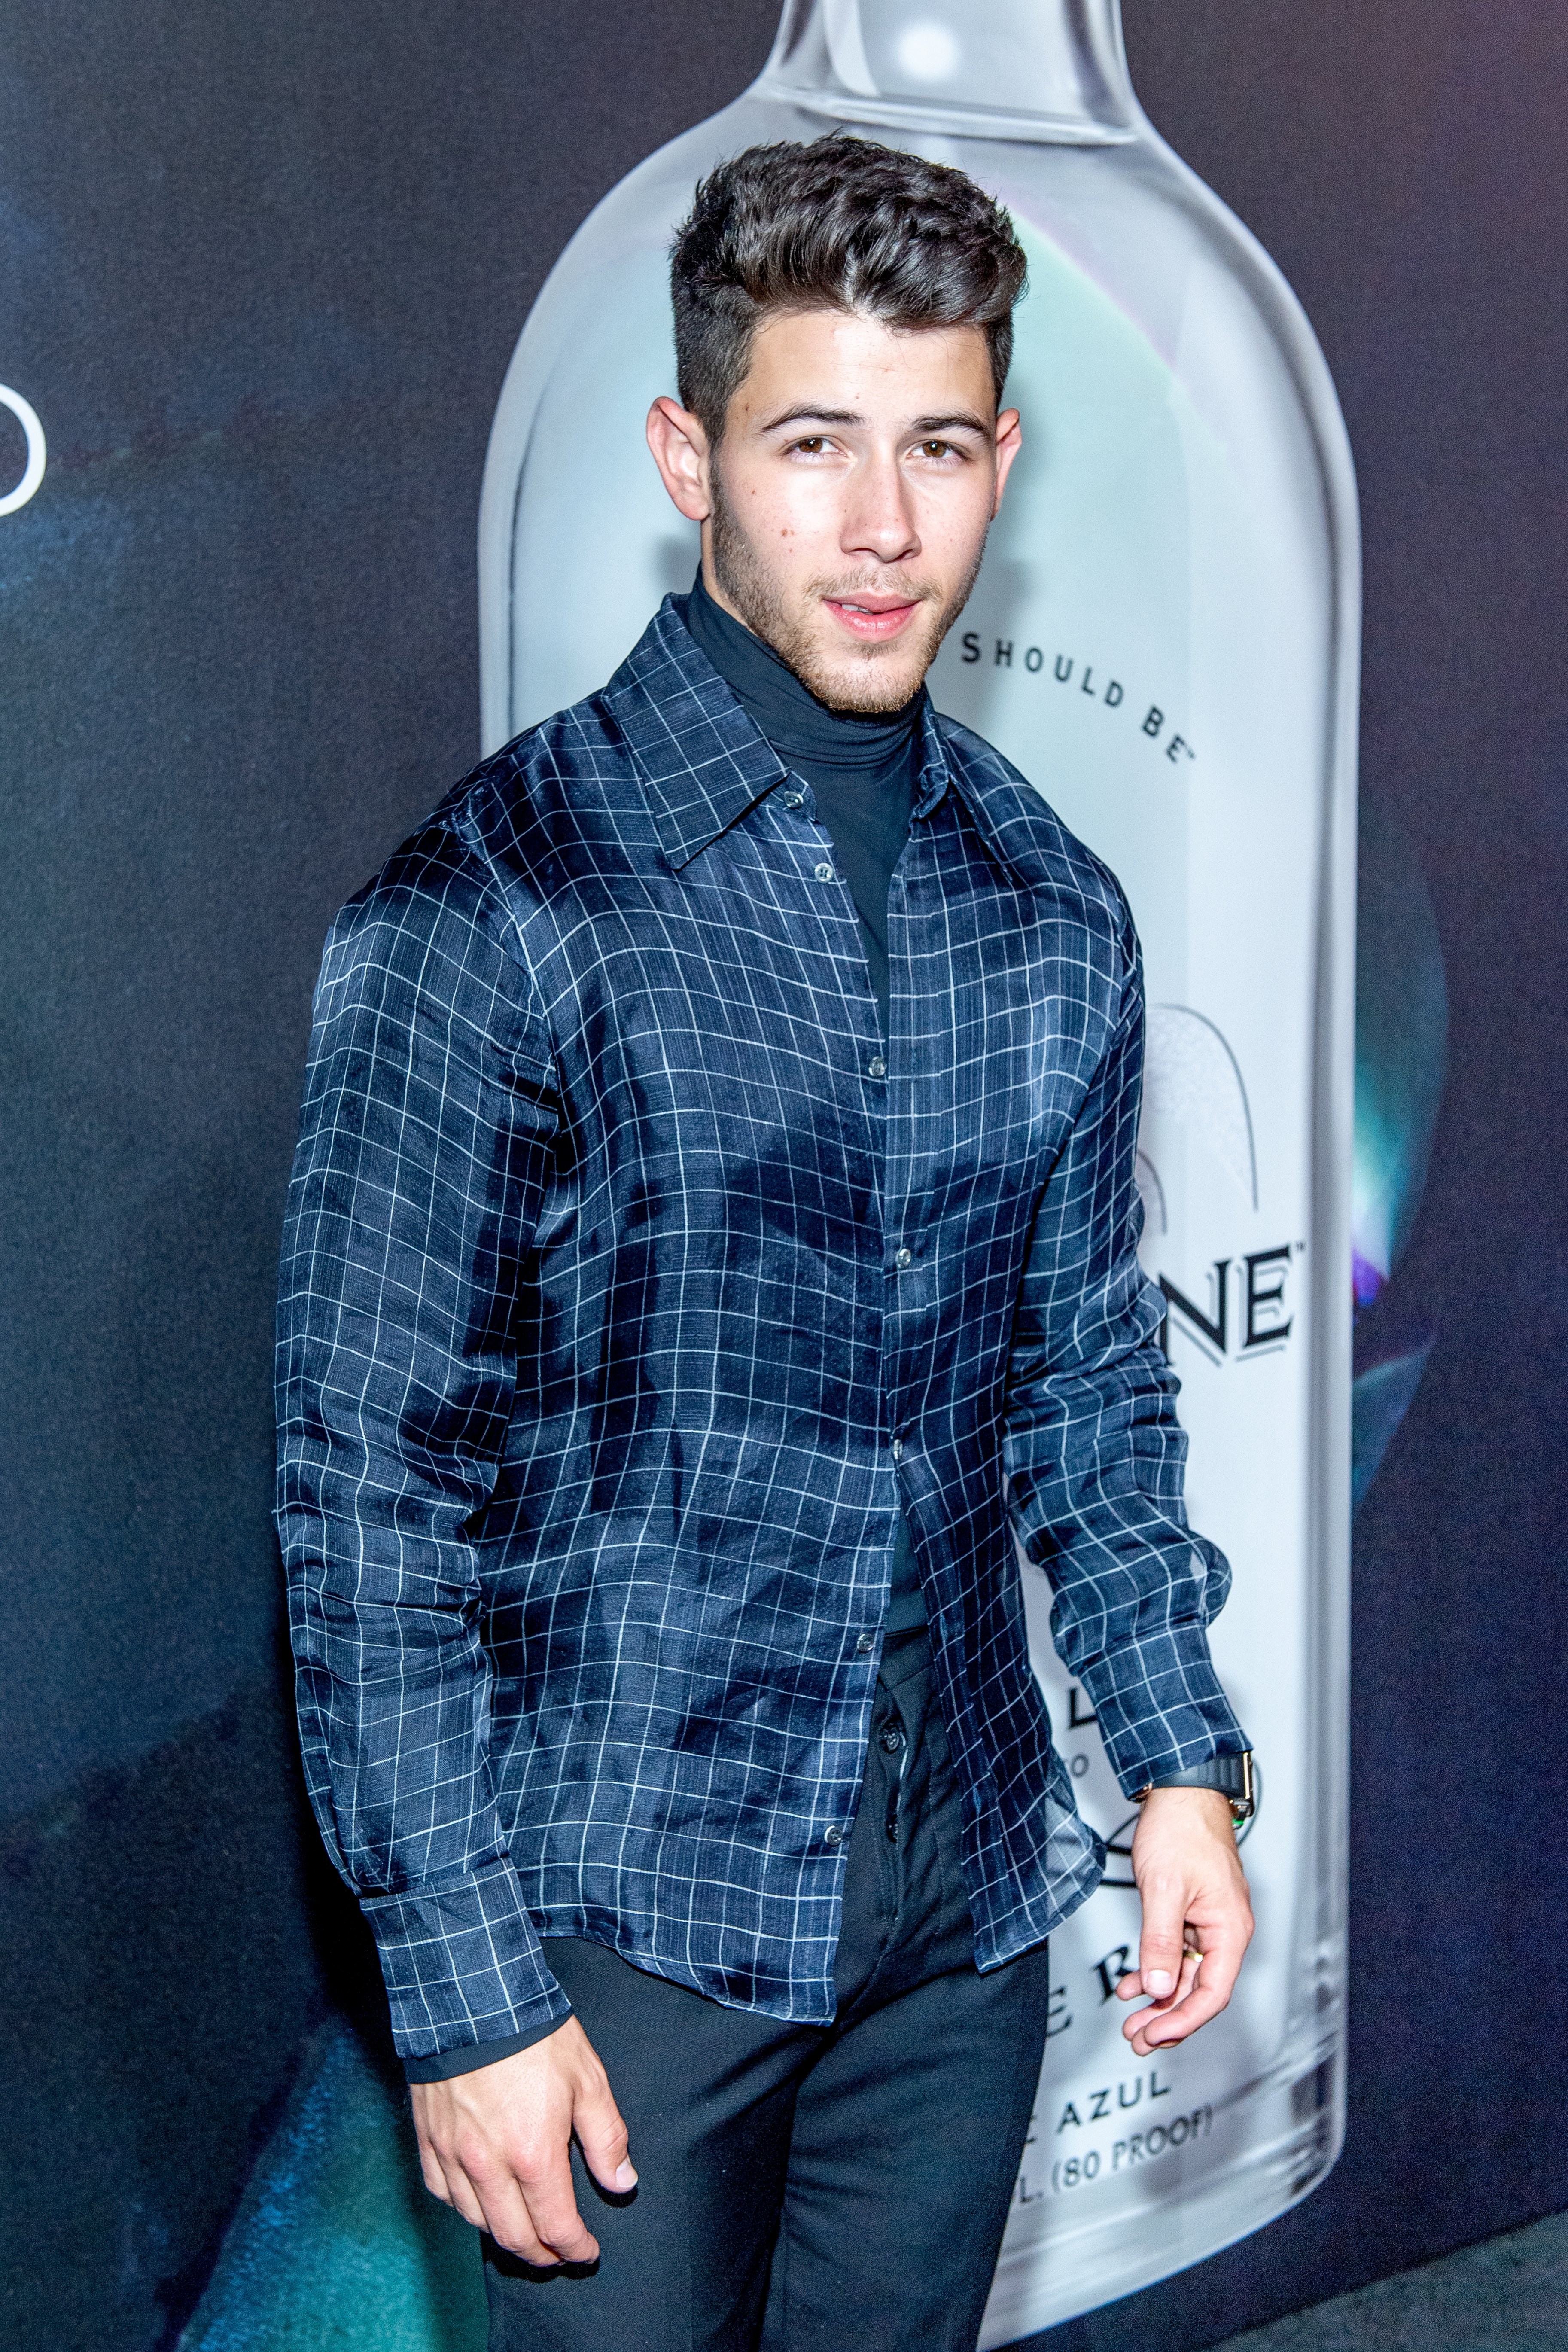  Nick Jonas attends Nick Jonas x John Varvatos Villa One Tequila Launch on August 29, 2019, in New York City. | Source: Getty Images.